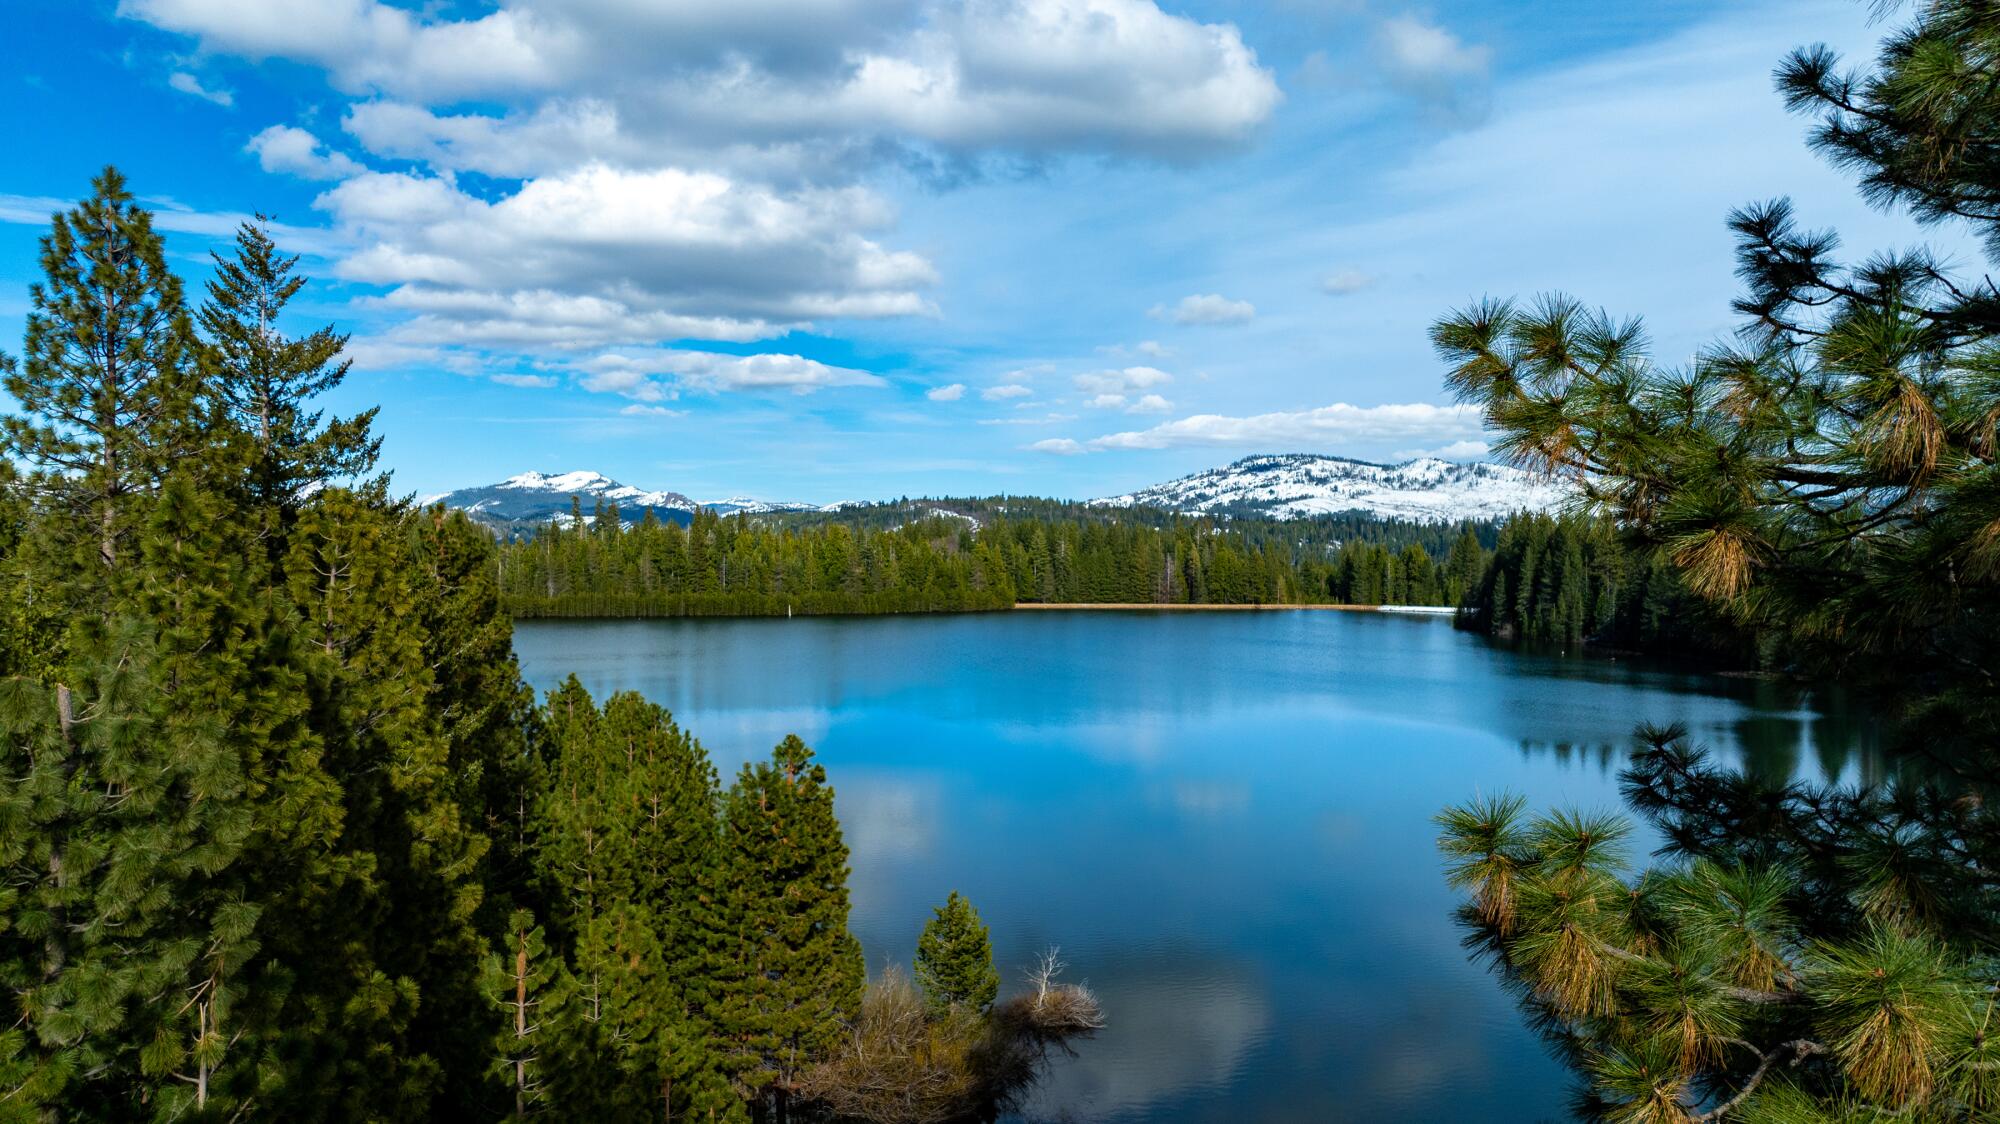 Clouds hover over a bright blue lake surrounded by evergreens. Snowy mountains rise in the background.